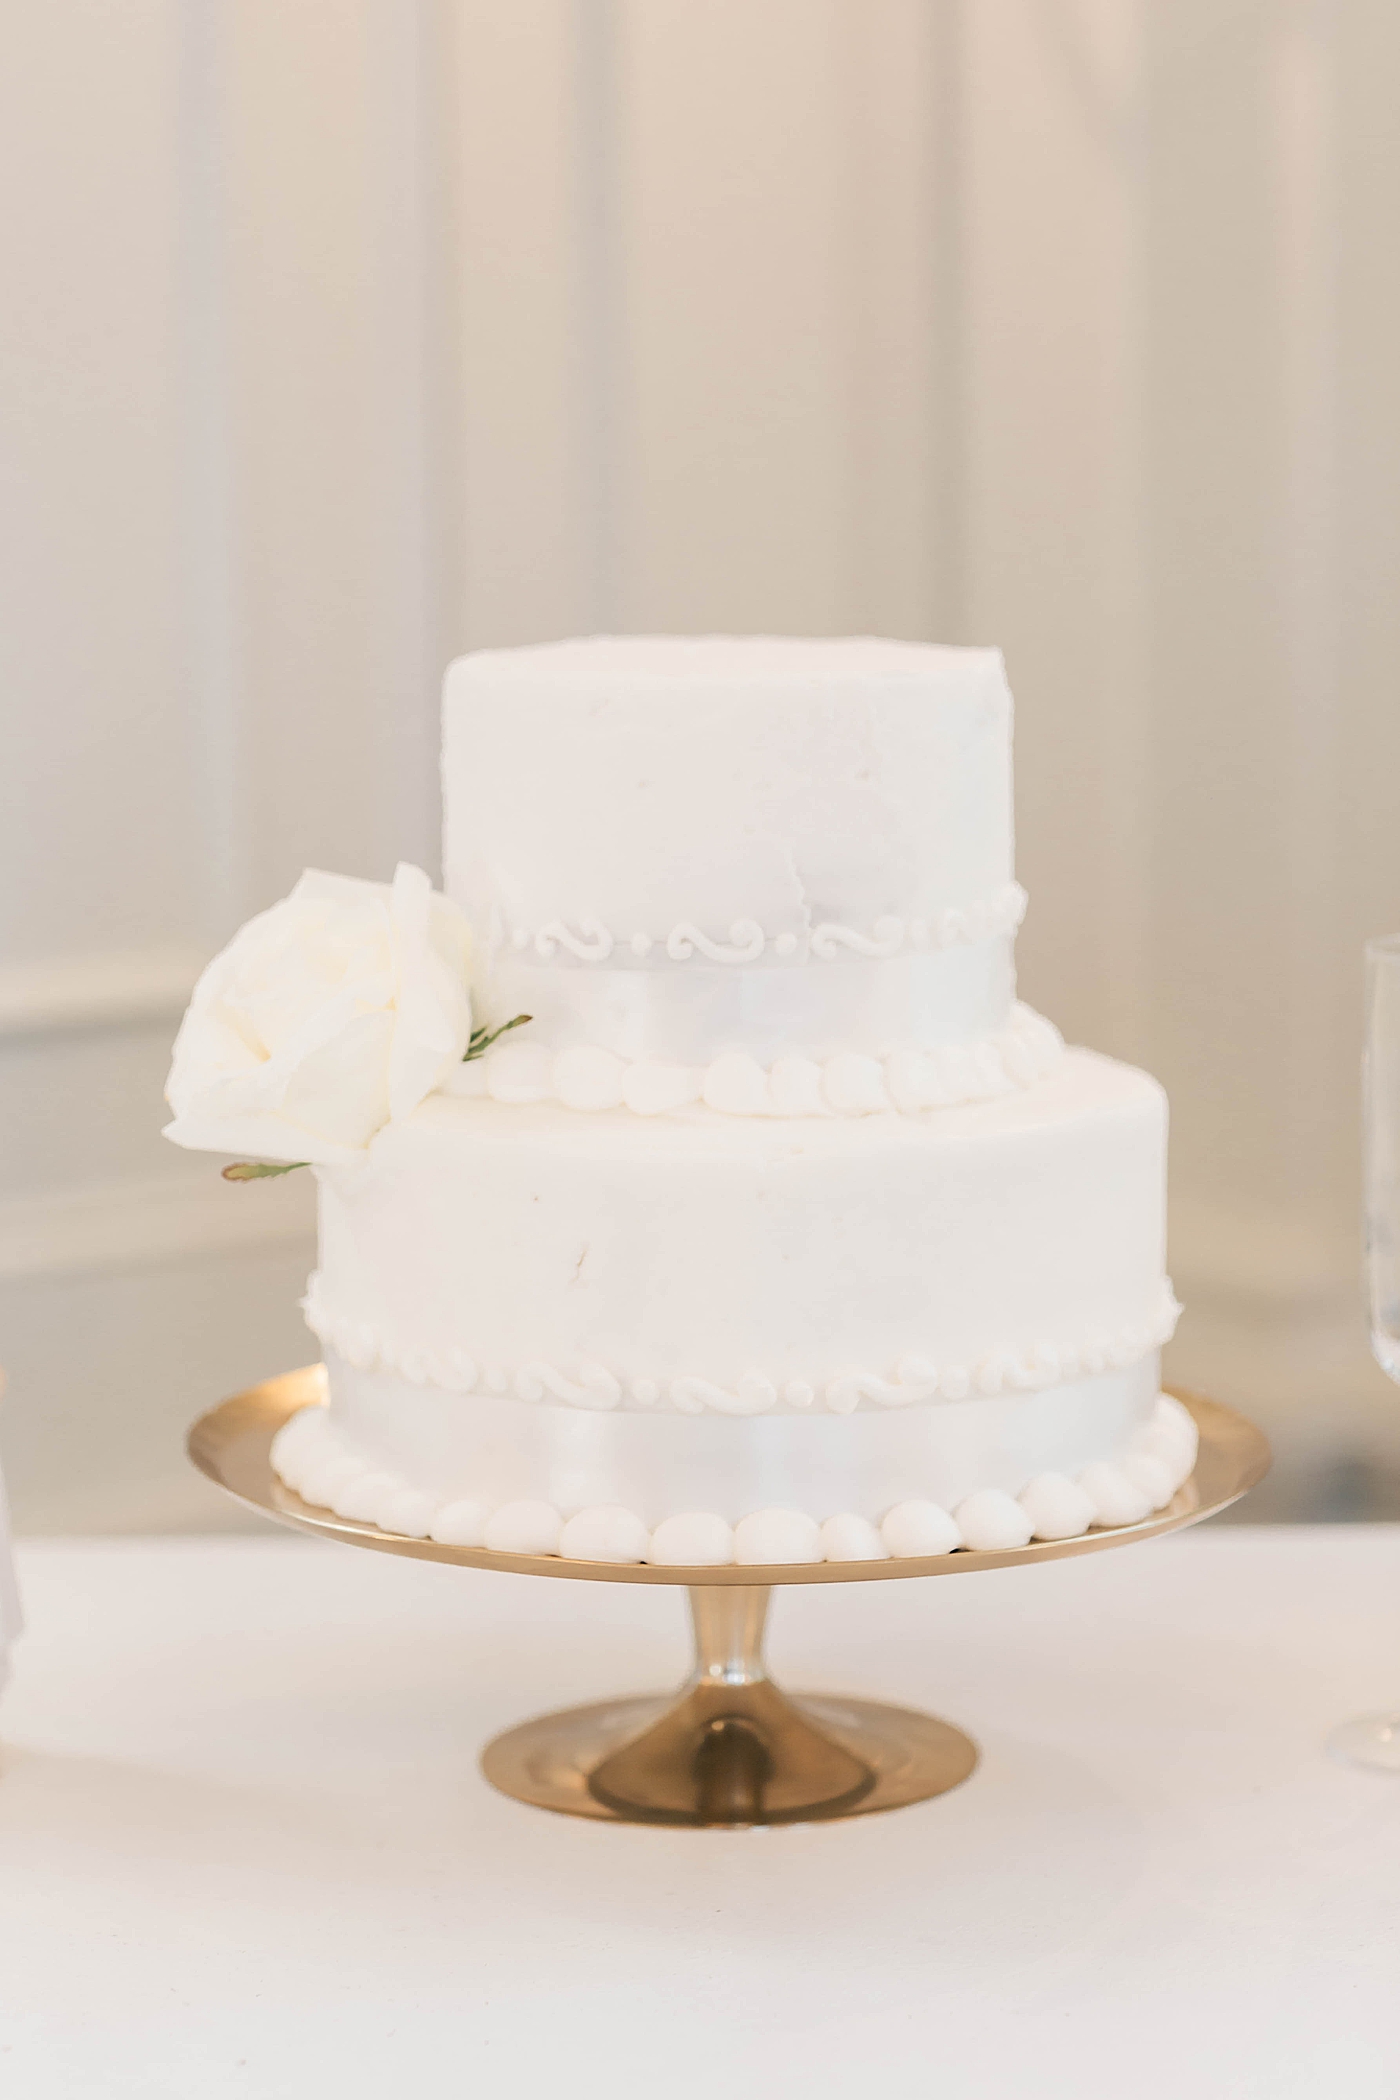 White wedding cake with rose detail during Intimate spring wedding | Carters Event Co